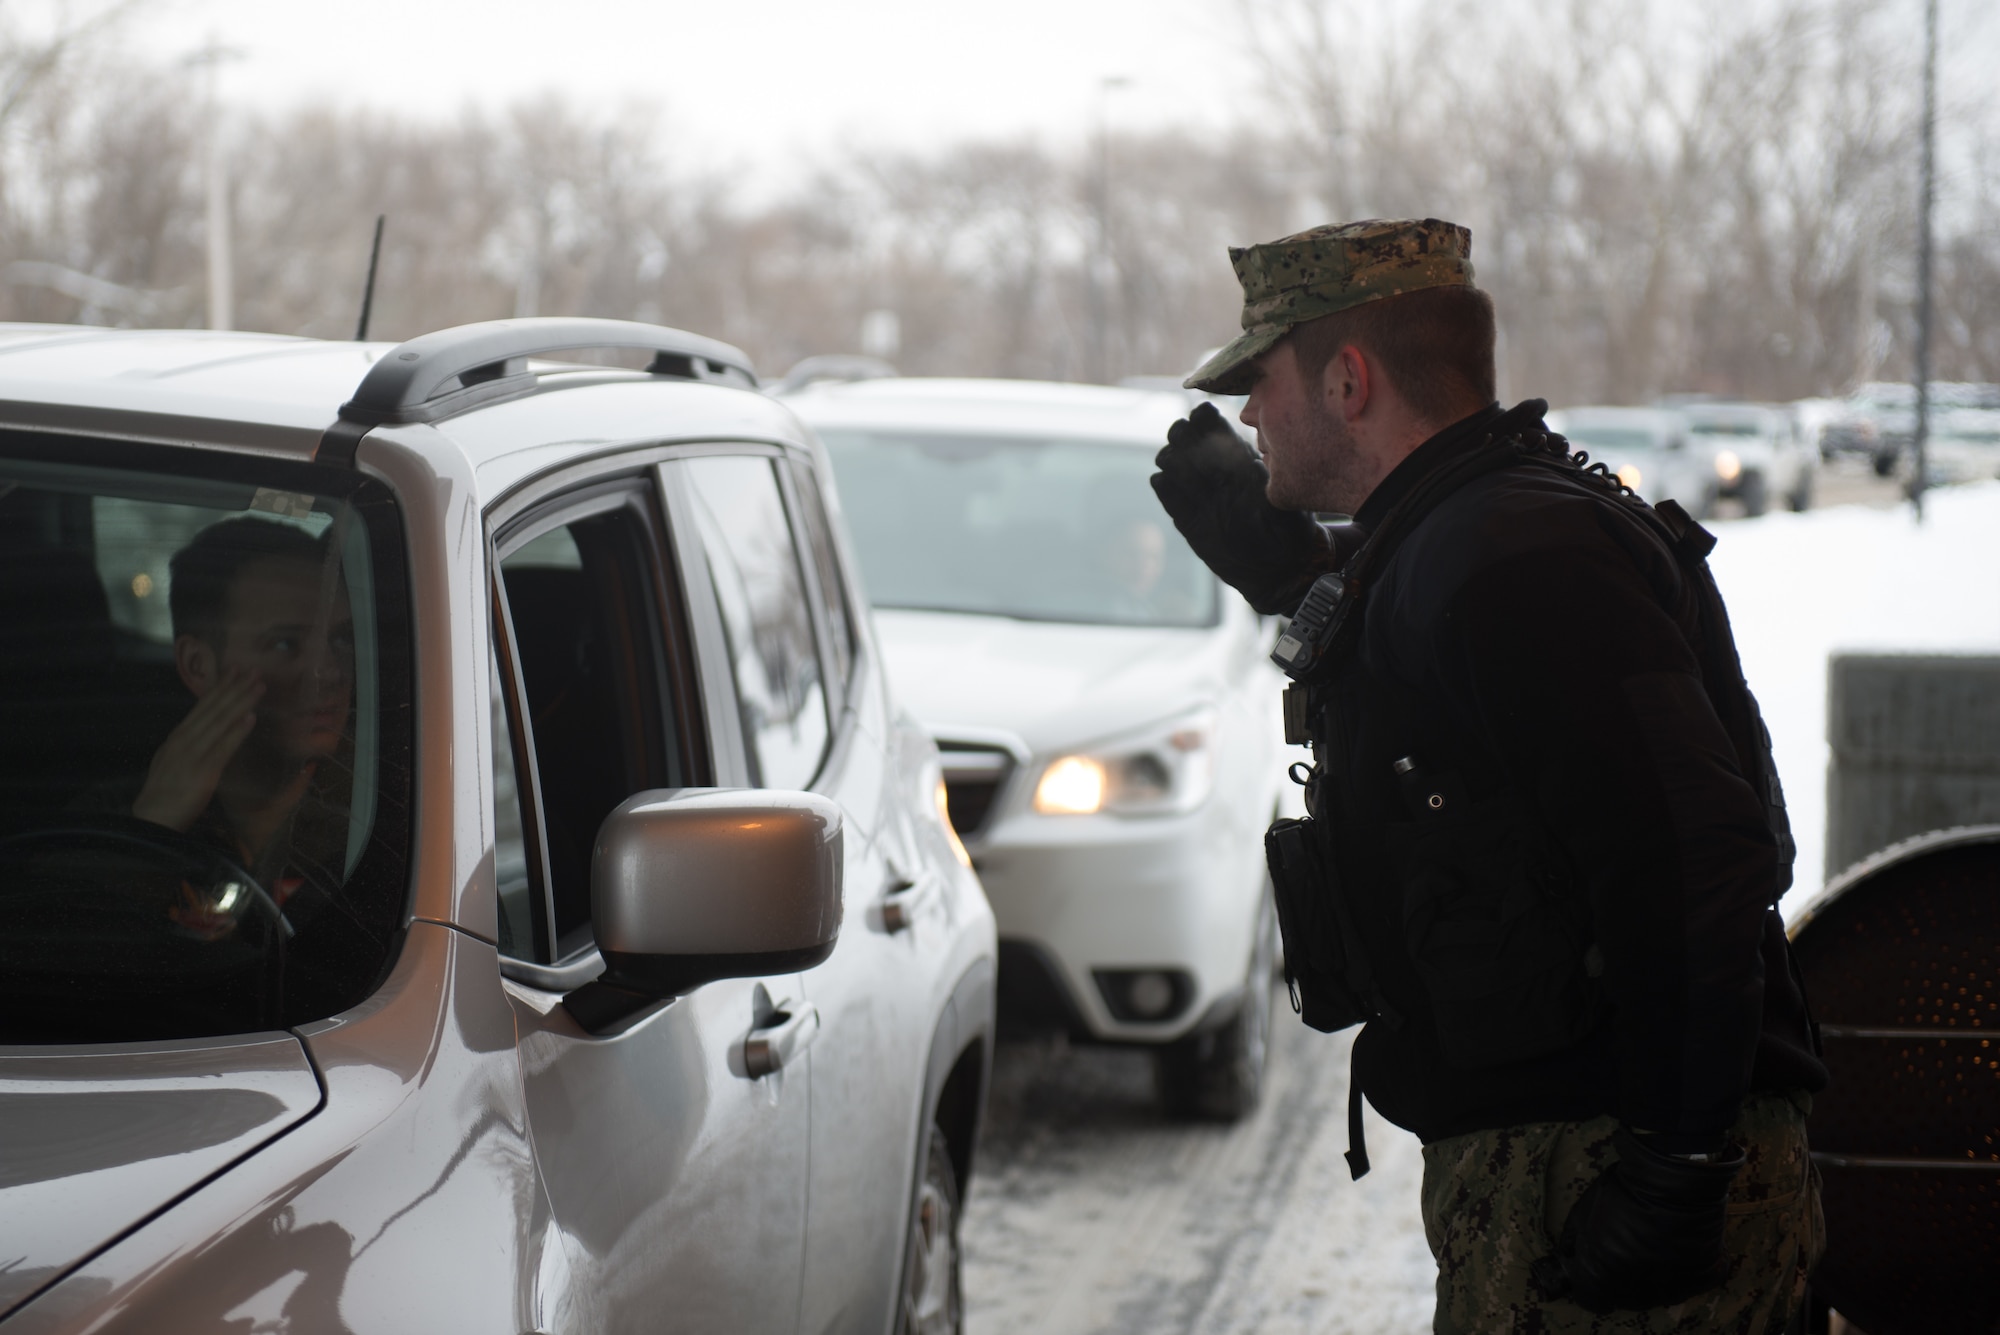 U.S. Air Force Staff Sgt. Gage Taylor, 55th Security Force Squadron, waves for a car to proceed at the U.S. Strategic Command gate March 7, 2019, on Offutt Air Force Base. Taylor is one of nearly a dozen guards working the gate in subfreezing temperatures. (U.S. Air Force photo by Tech. Sgt. Rachelle Blake)